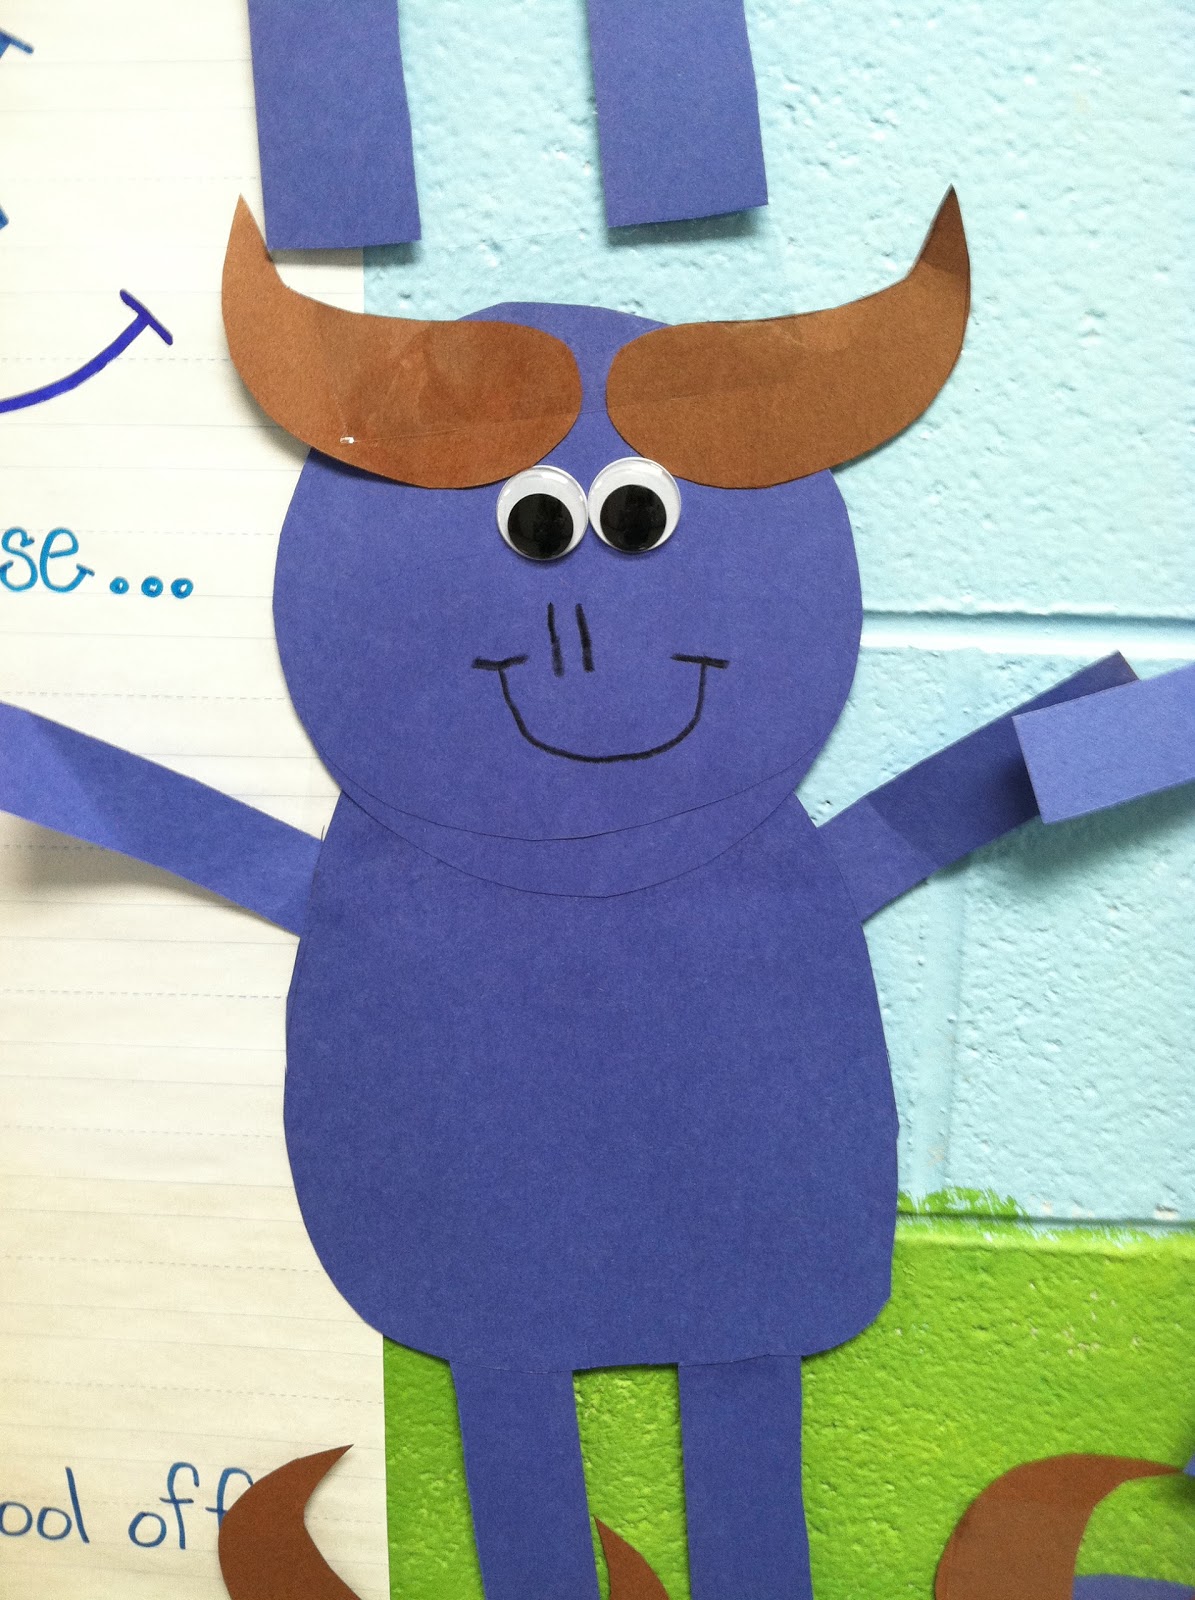 Life in First Grade: The Big Blue Ox and more Reading Center Pics